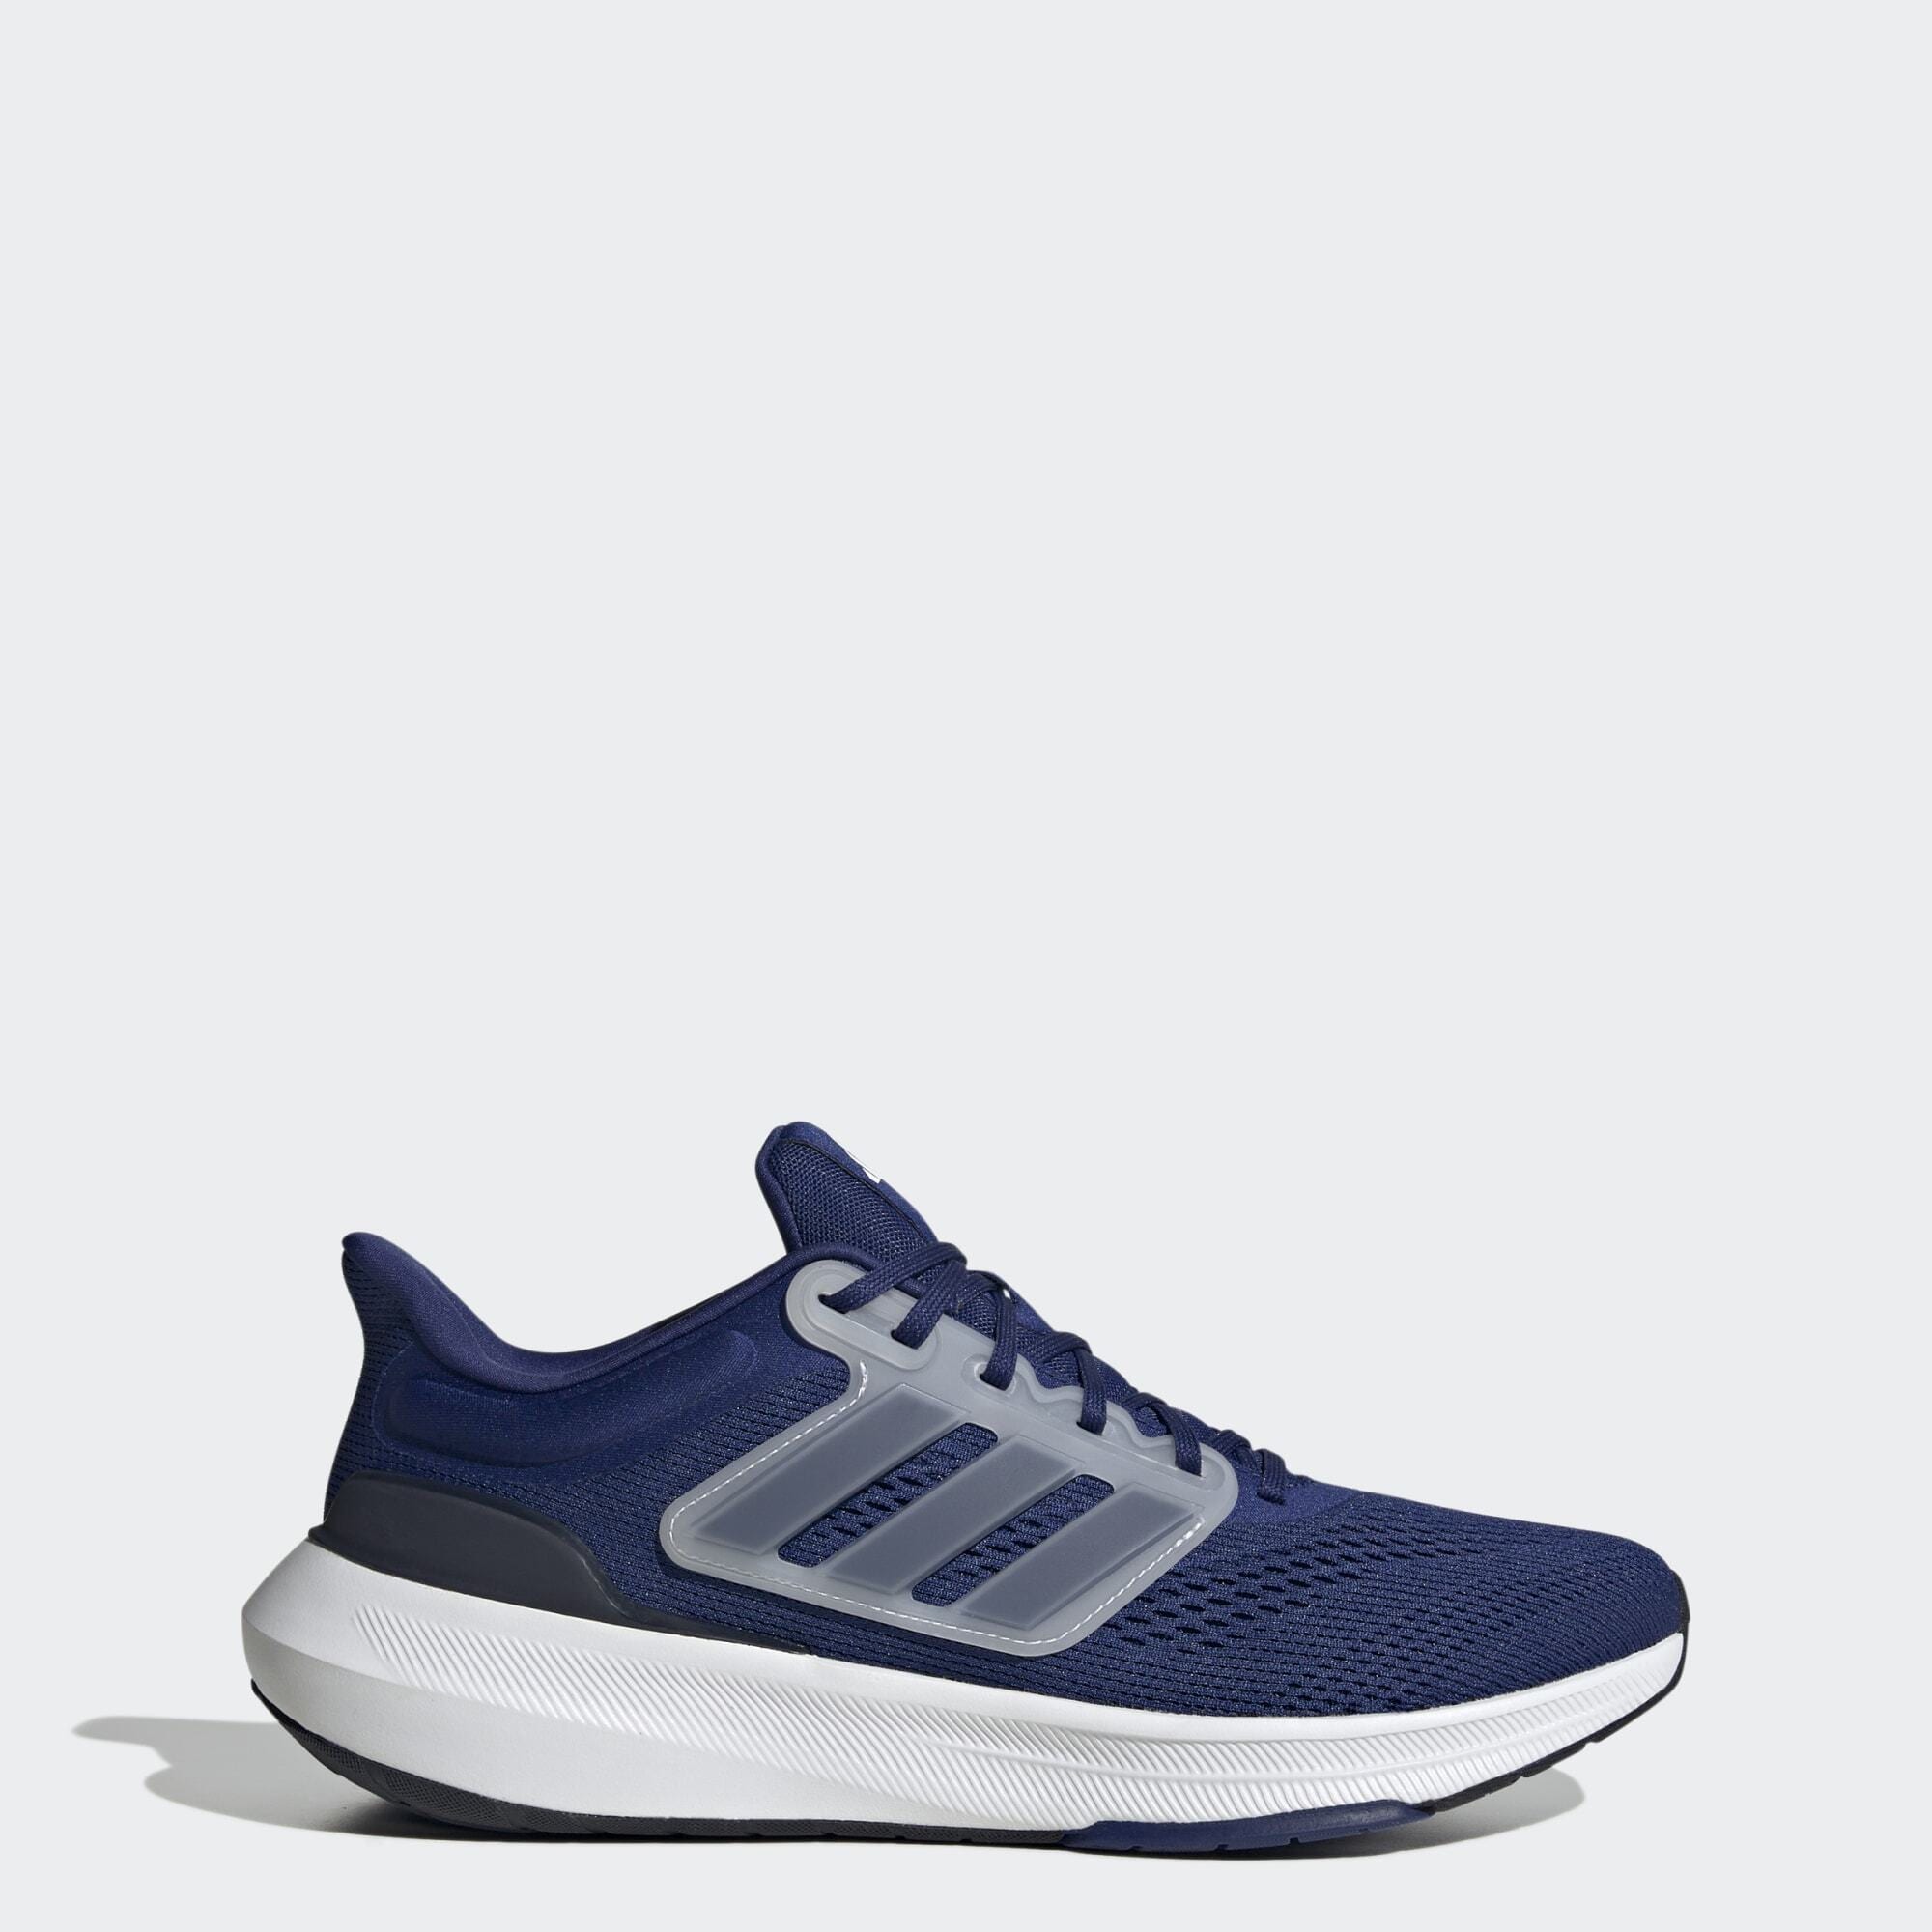 adidas Ultrabounce Shoes Victory Blue/Victory Blue/Cloud White | Pro:Direct Running